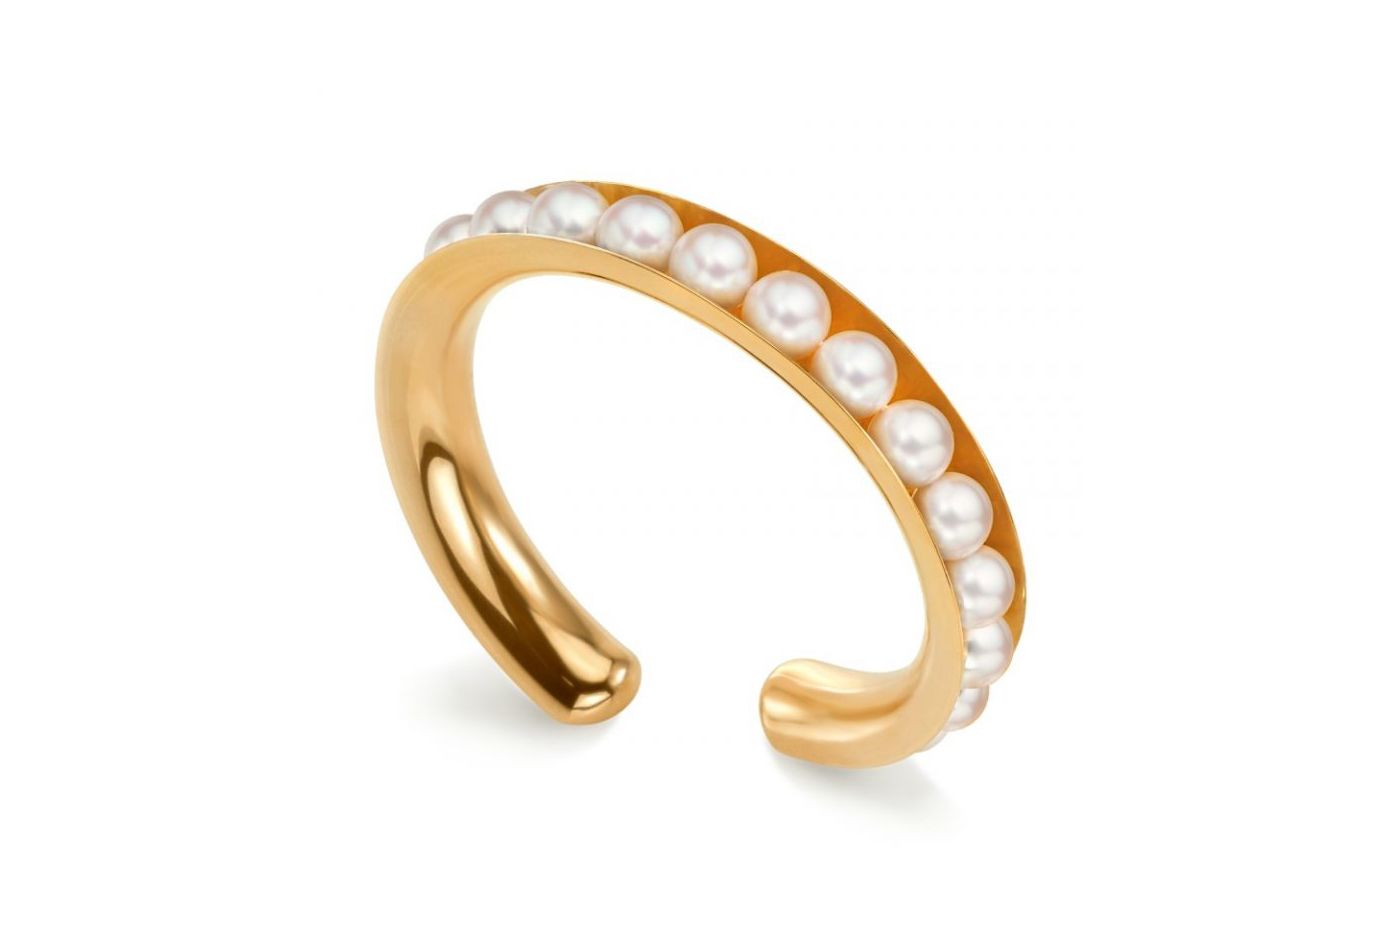 Flex bangle by Sean Gilson for Assael with Akoya pearls in 18k yellow gold 